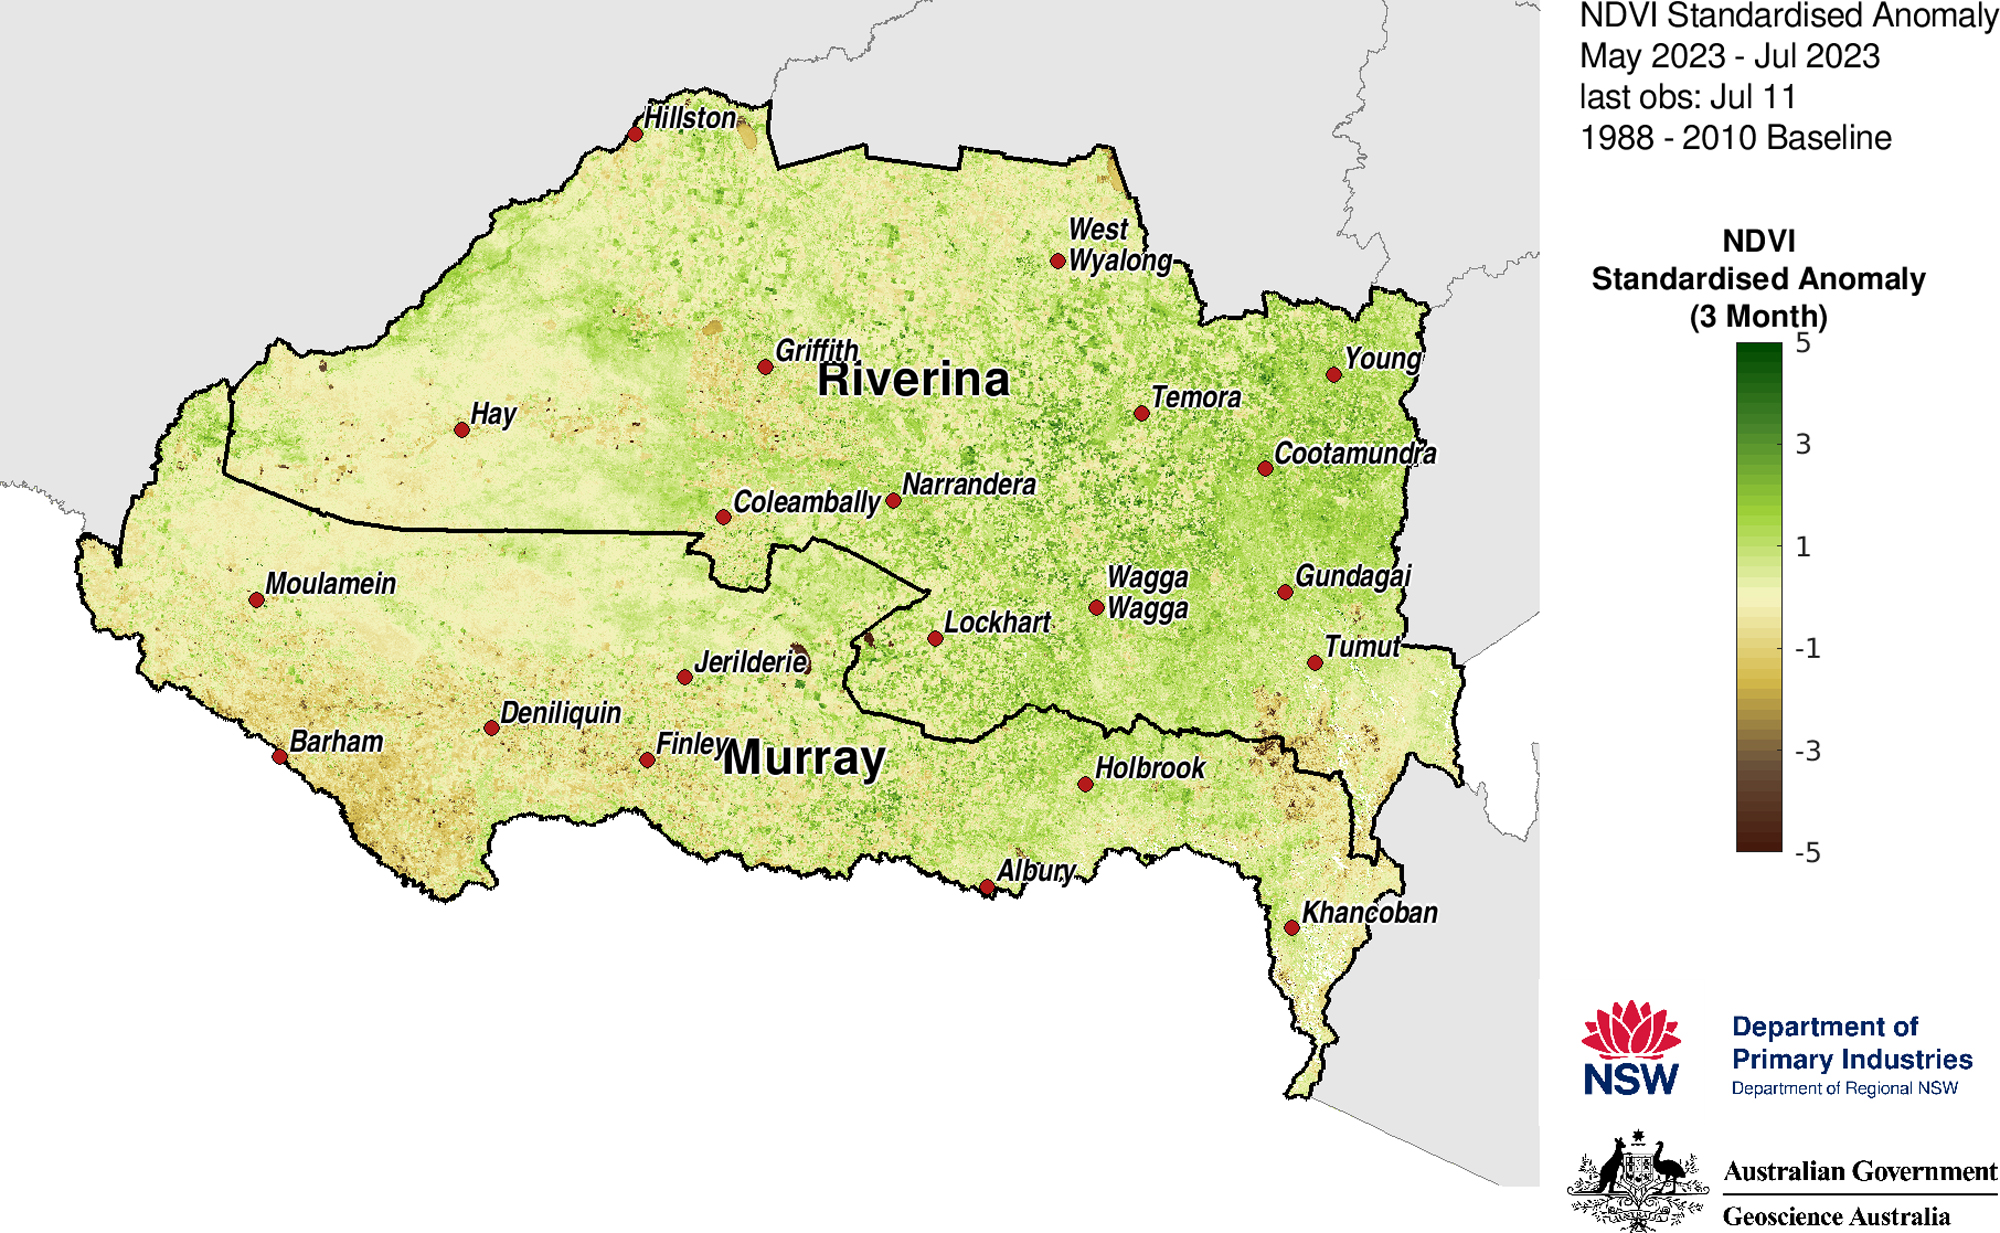 Figure 19. NDVI anomaly map for the Murray and Riverina LLS regions